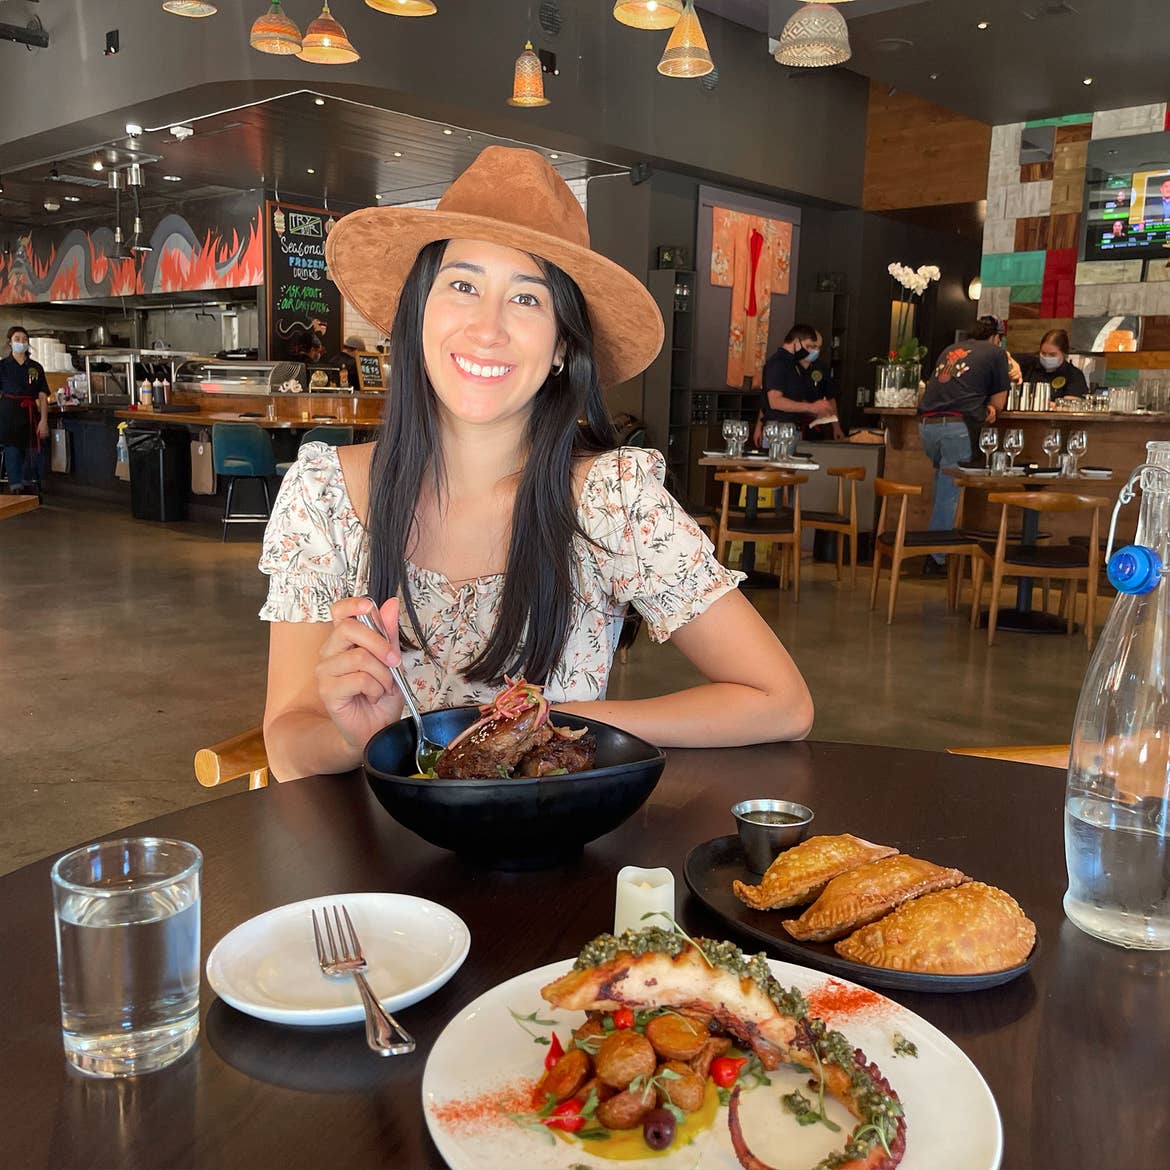 A woman in a floral sundress and sun hat sits at a wooden table with a bowl and several dishes of food in a restaurant.